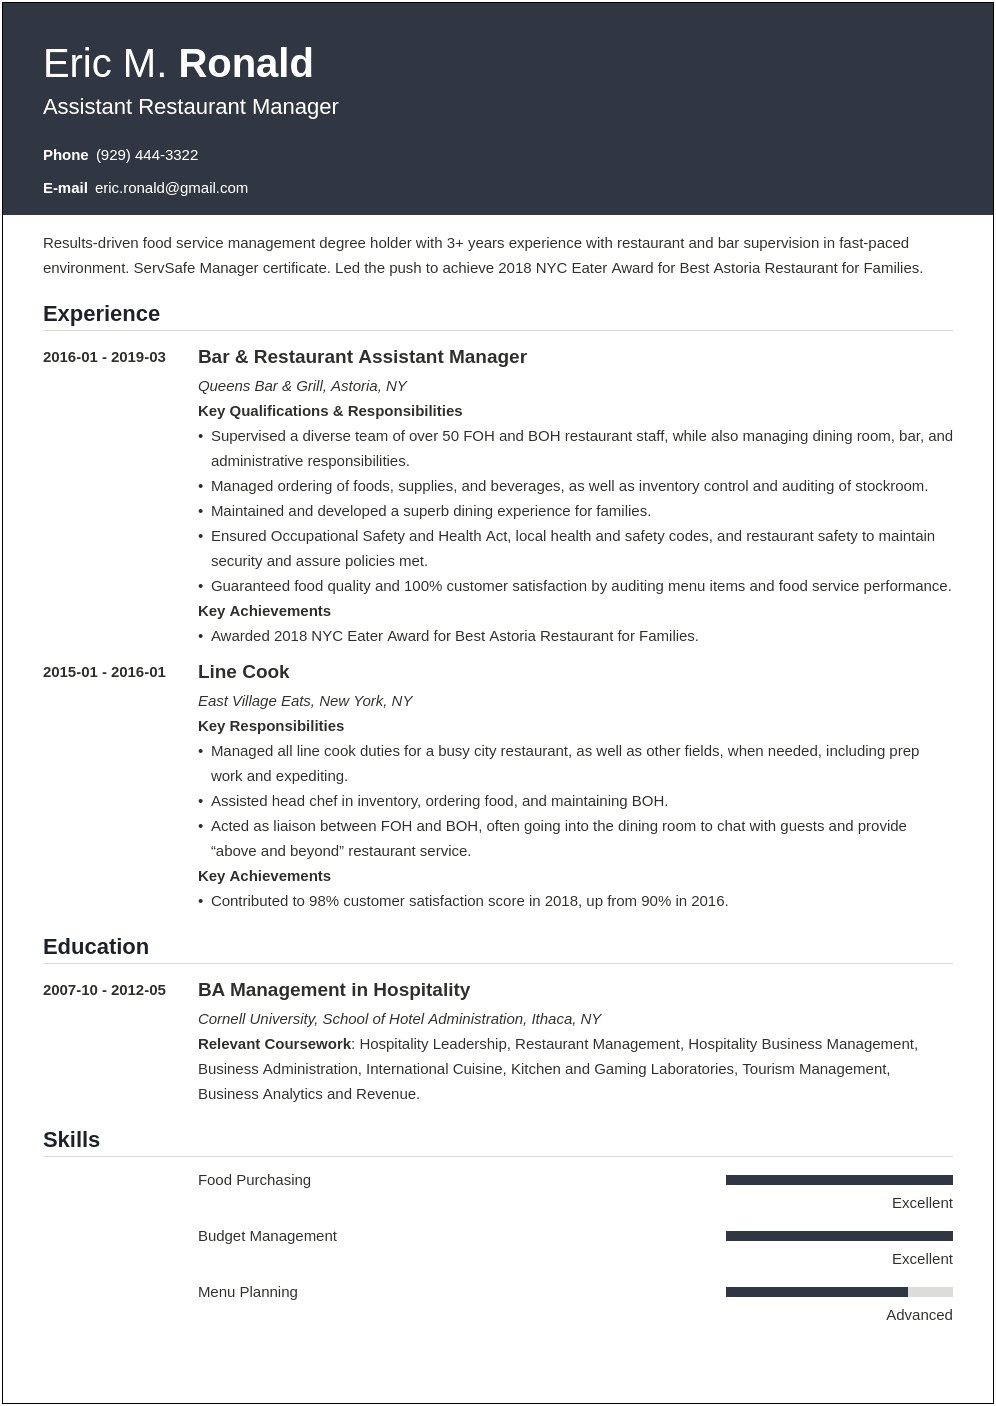 Example Of Food Service General Manager Resume